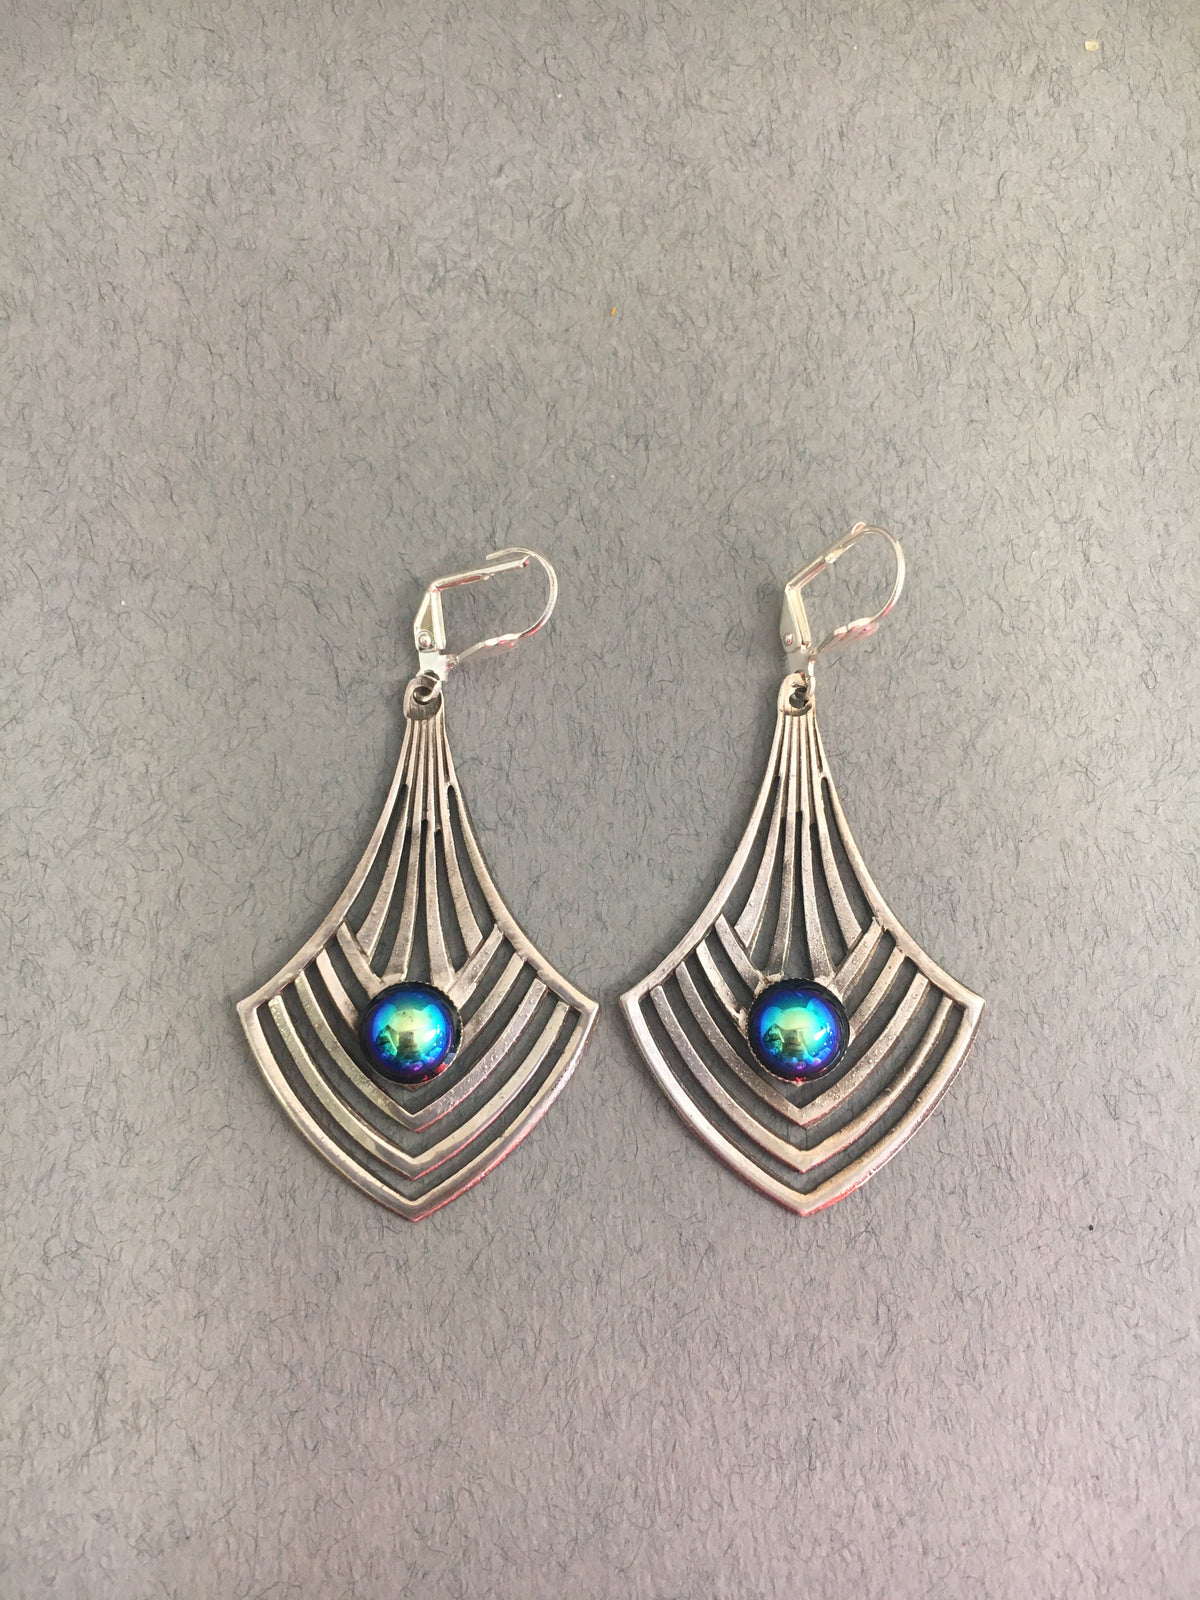 Art Deco Earrings with Iridescent Detailing by Jess Lelong